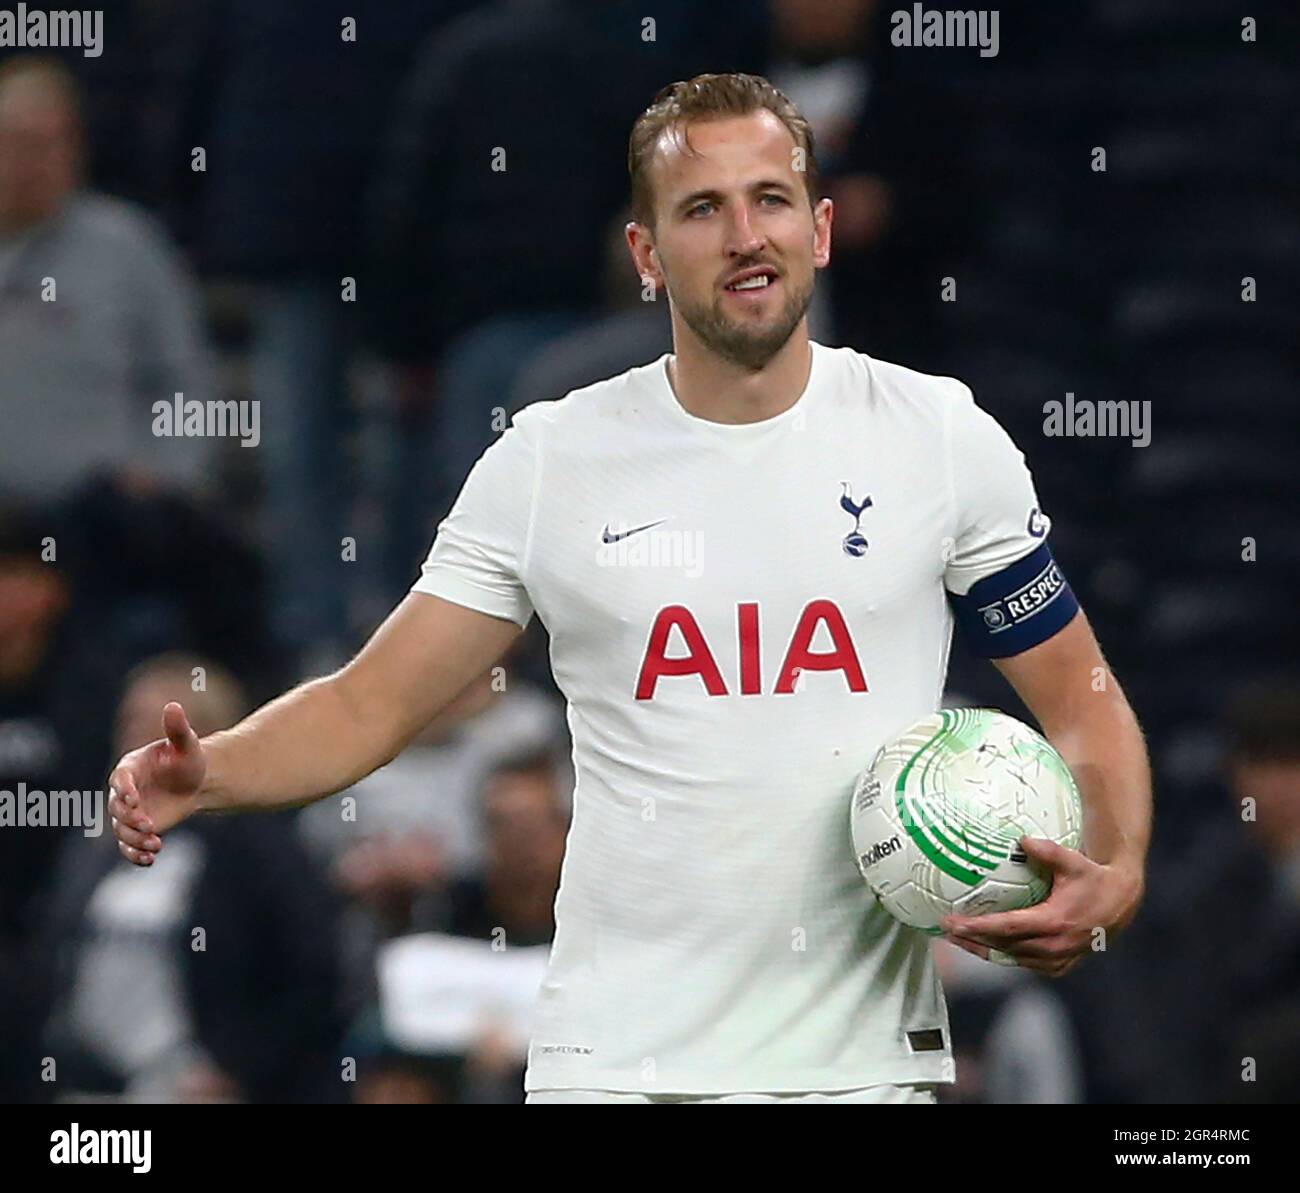 London, UK. 30th Sep, 2021. London, England - SEPTEMBER 30:Tottenham  Hotspur's Harry Kane with hat trick ball during Europa Conference League  Group G between Tottenham Hotspur and Nogometna sola Mura at Tottenham